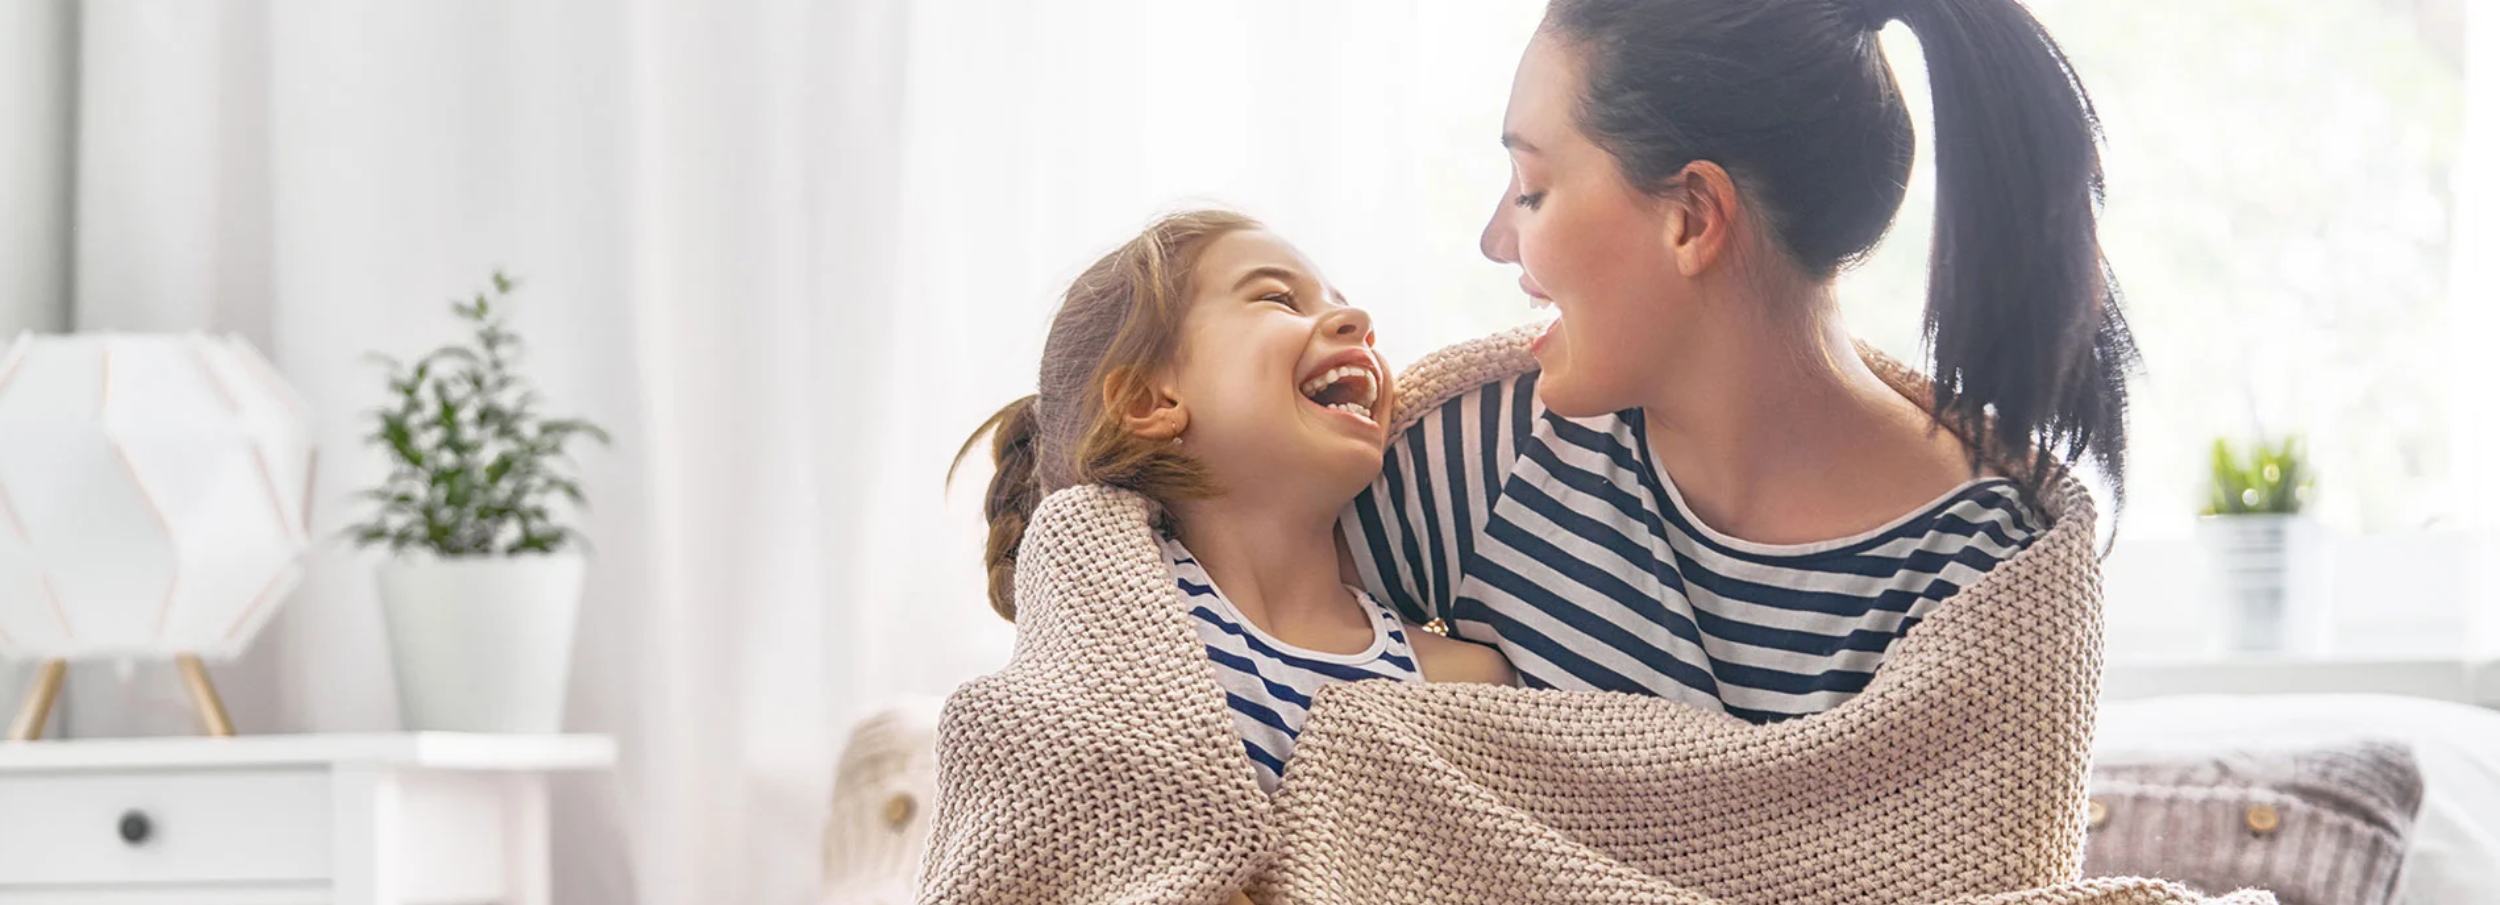 Mother and daughter laughing wrapped in a blanket.